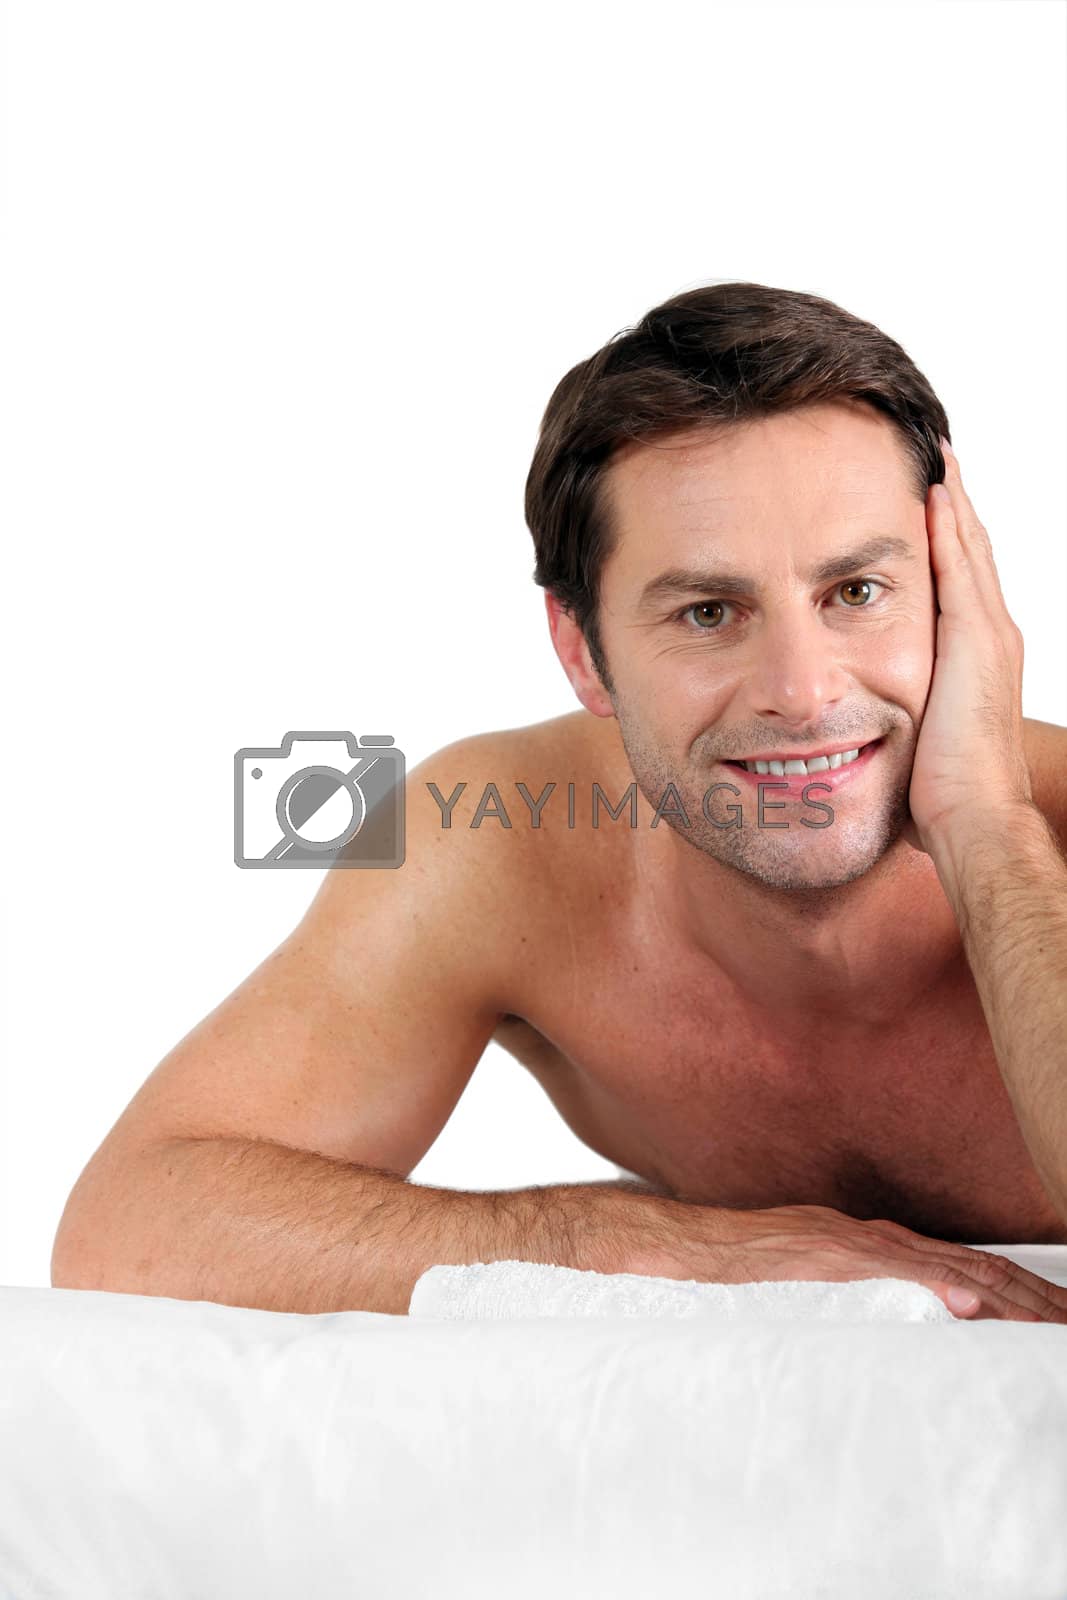 Royalty free image of Man laid on massage table by phovoir